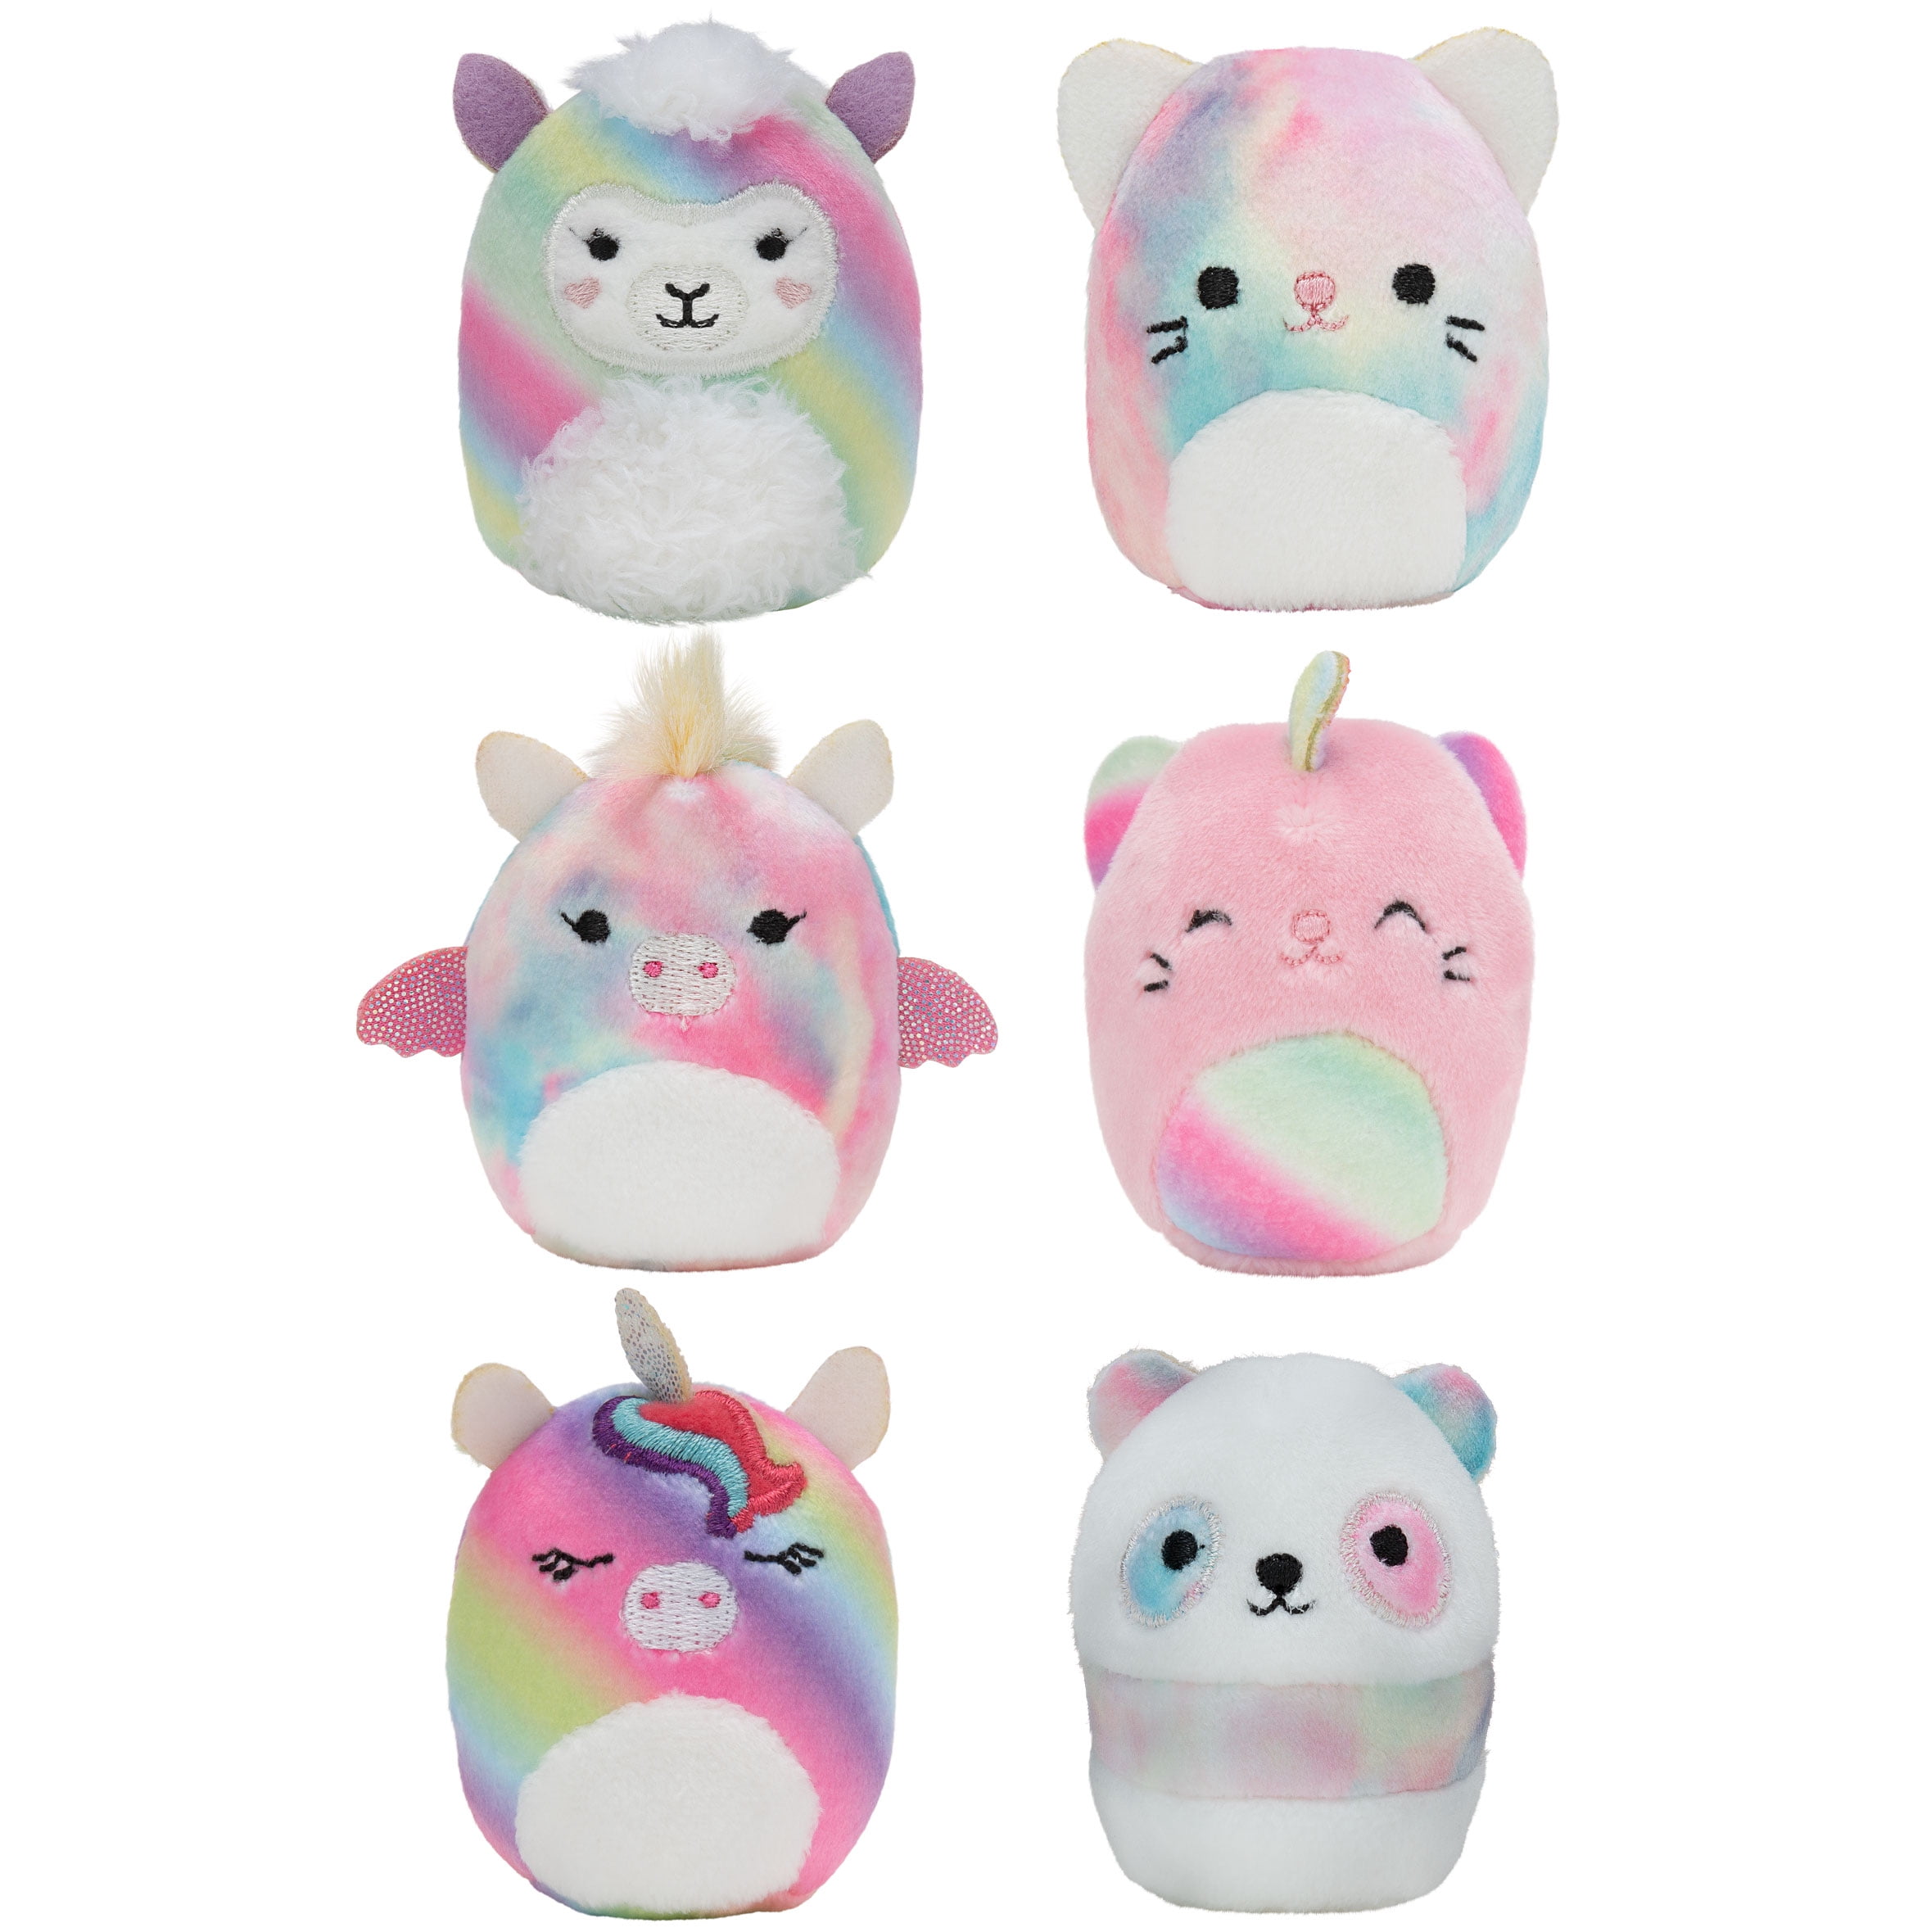 NEW Squishmallows for Justice Surprise Pack Series 2 Contains 1 4" Plush 